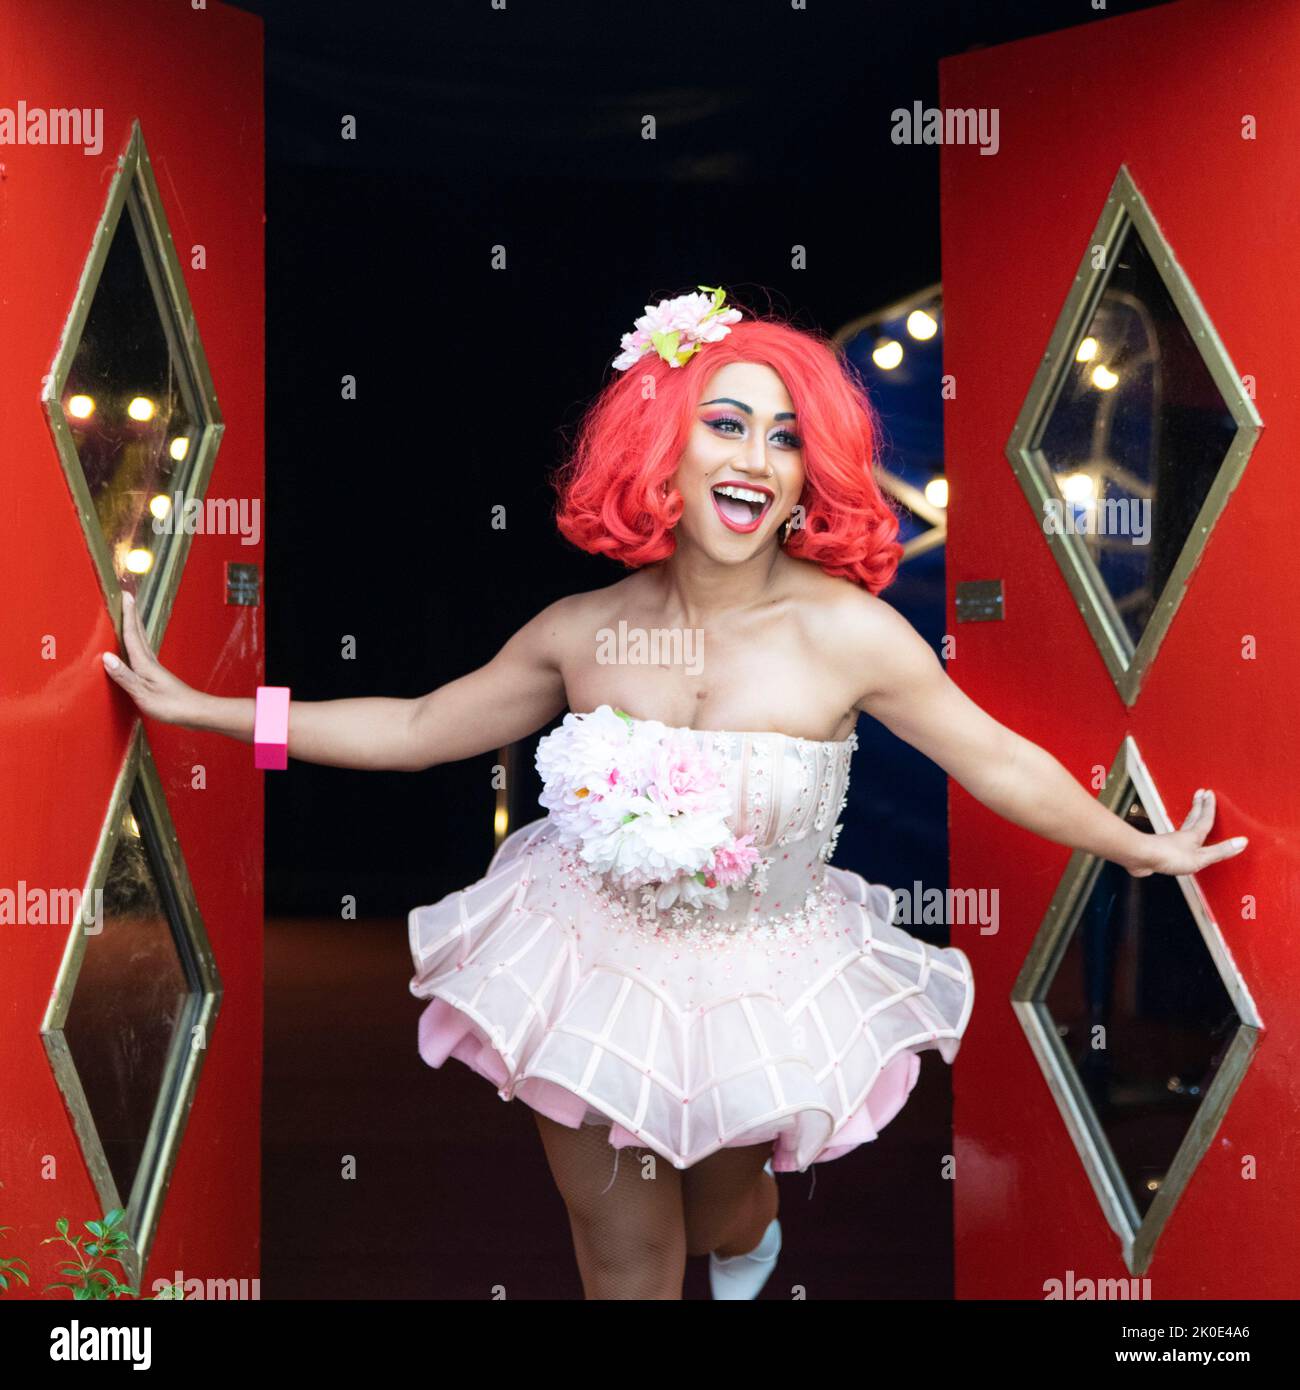 Ladyboy with red wig and pink tutu dress coming out of red doors and smiling, at the ladyboys of Bangkok show Stock Photo